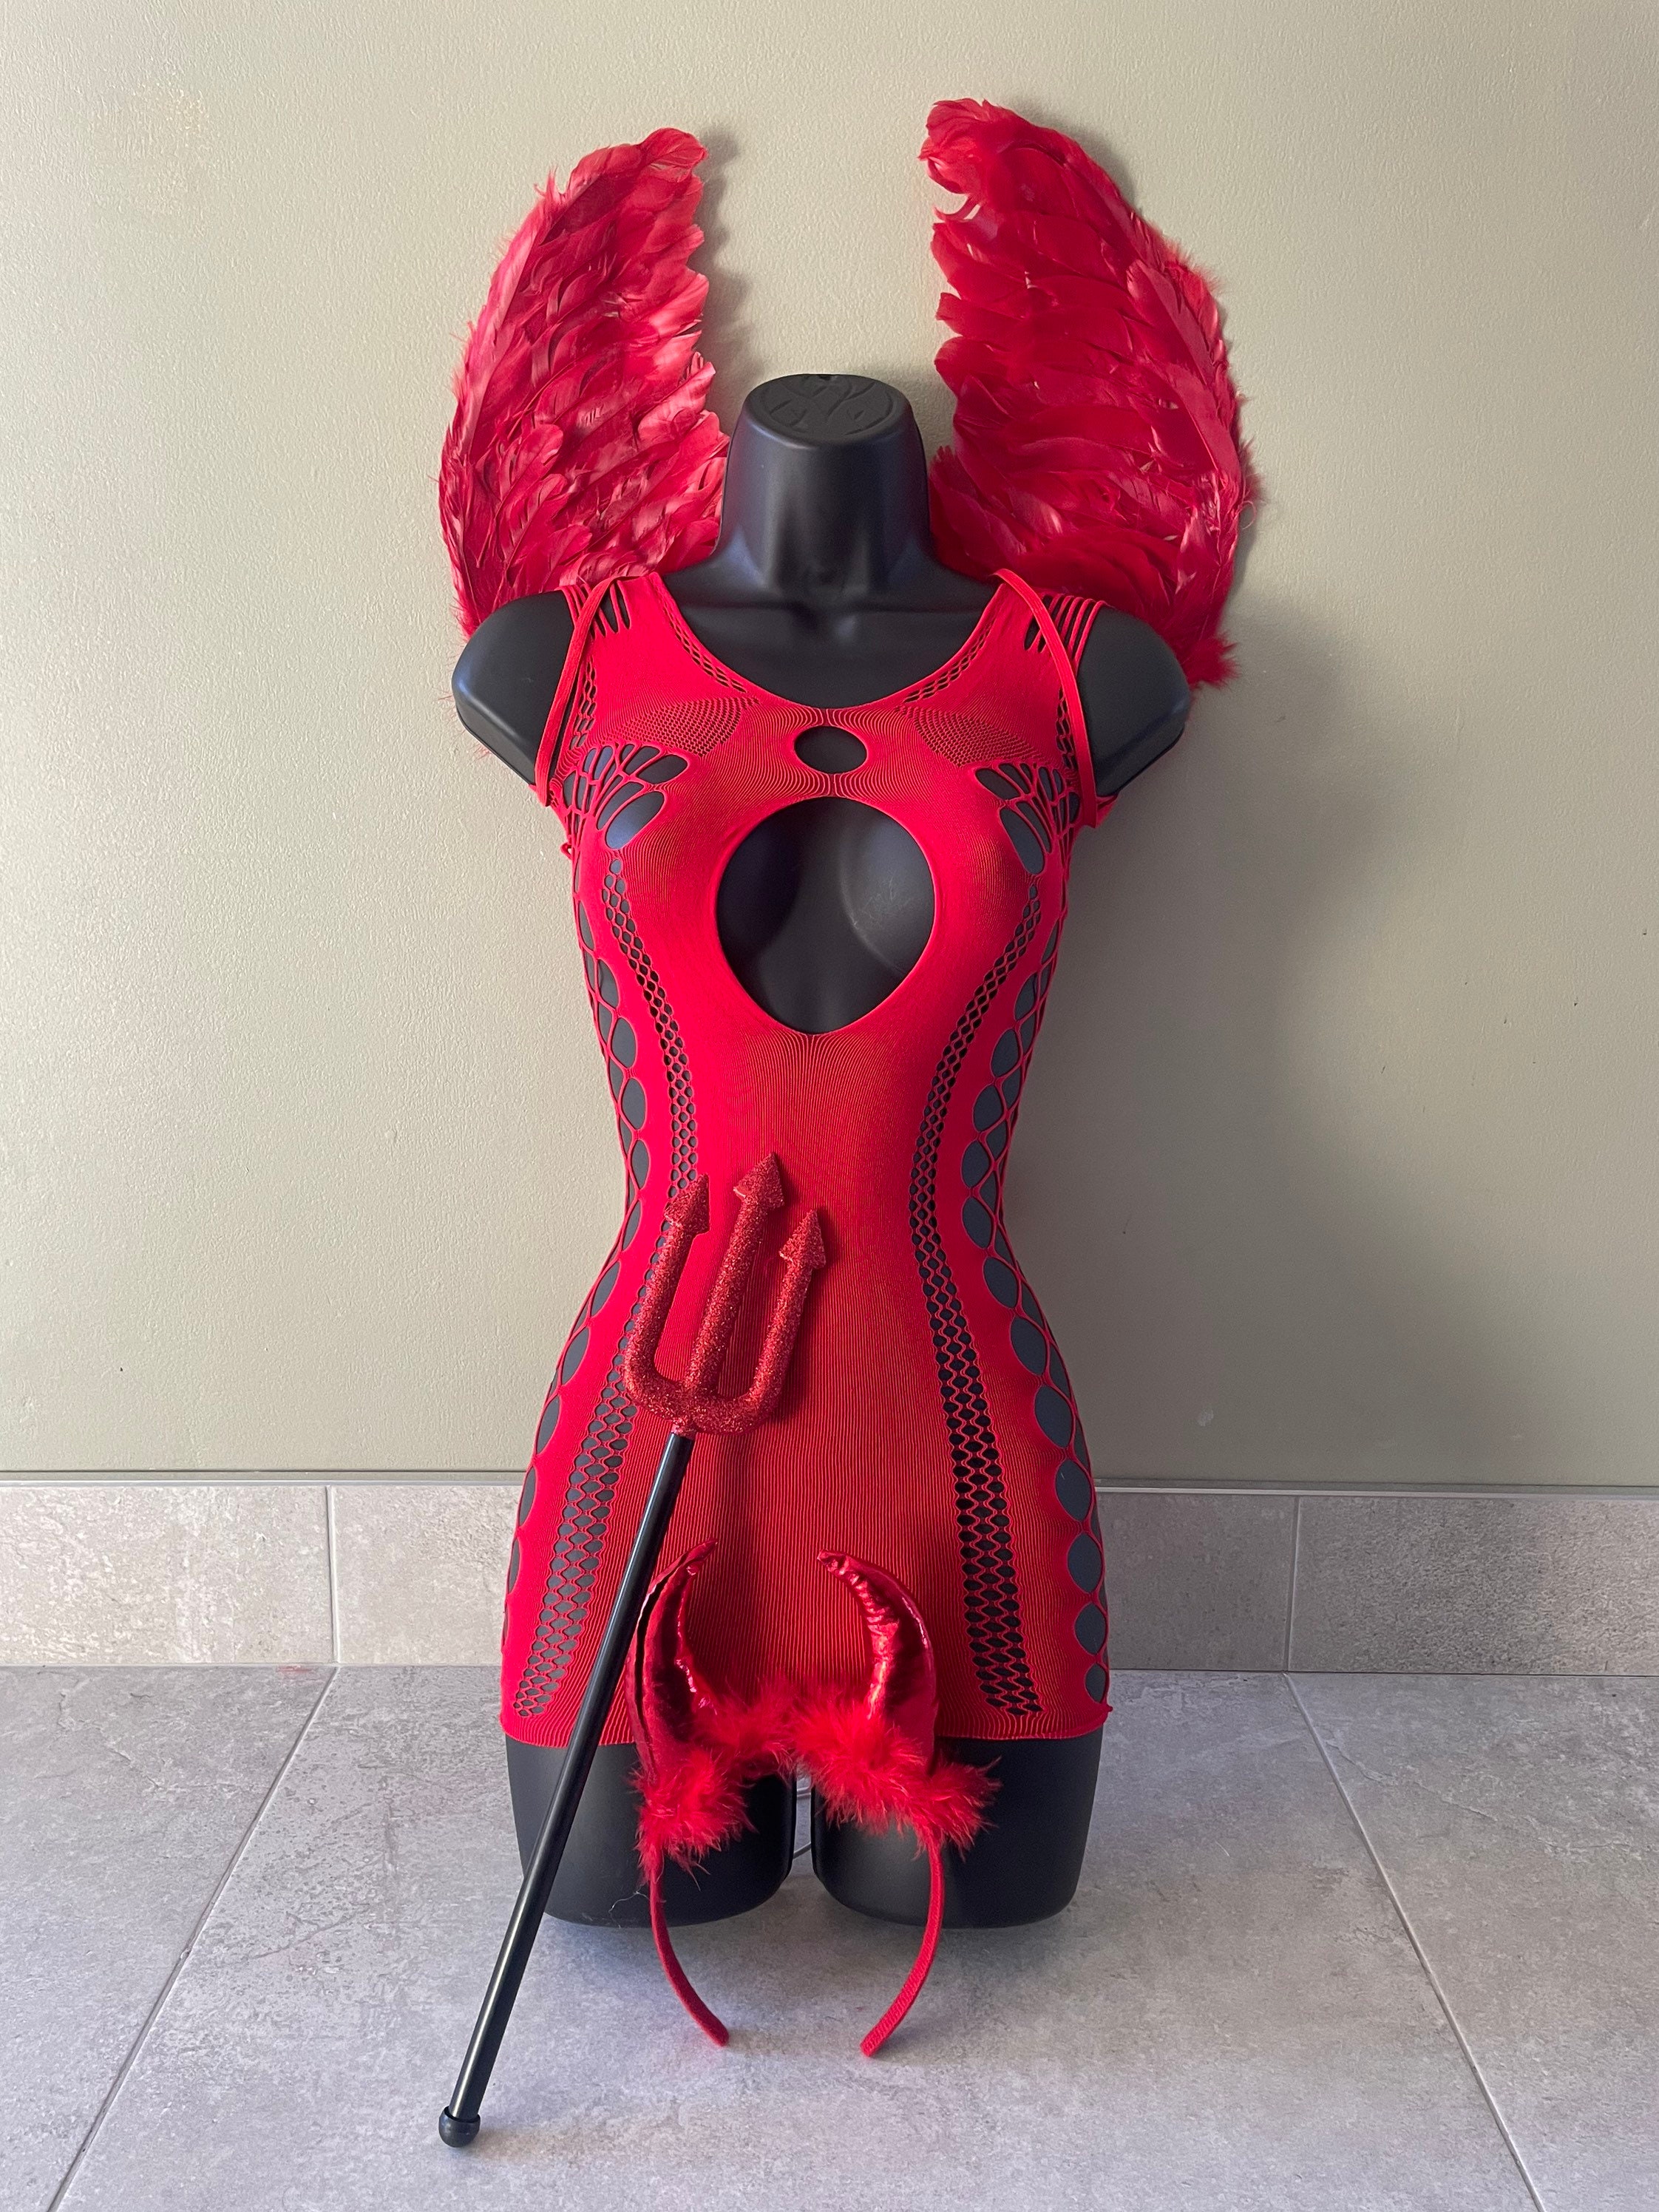 homemade devil costumes for adults